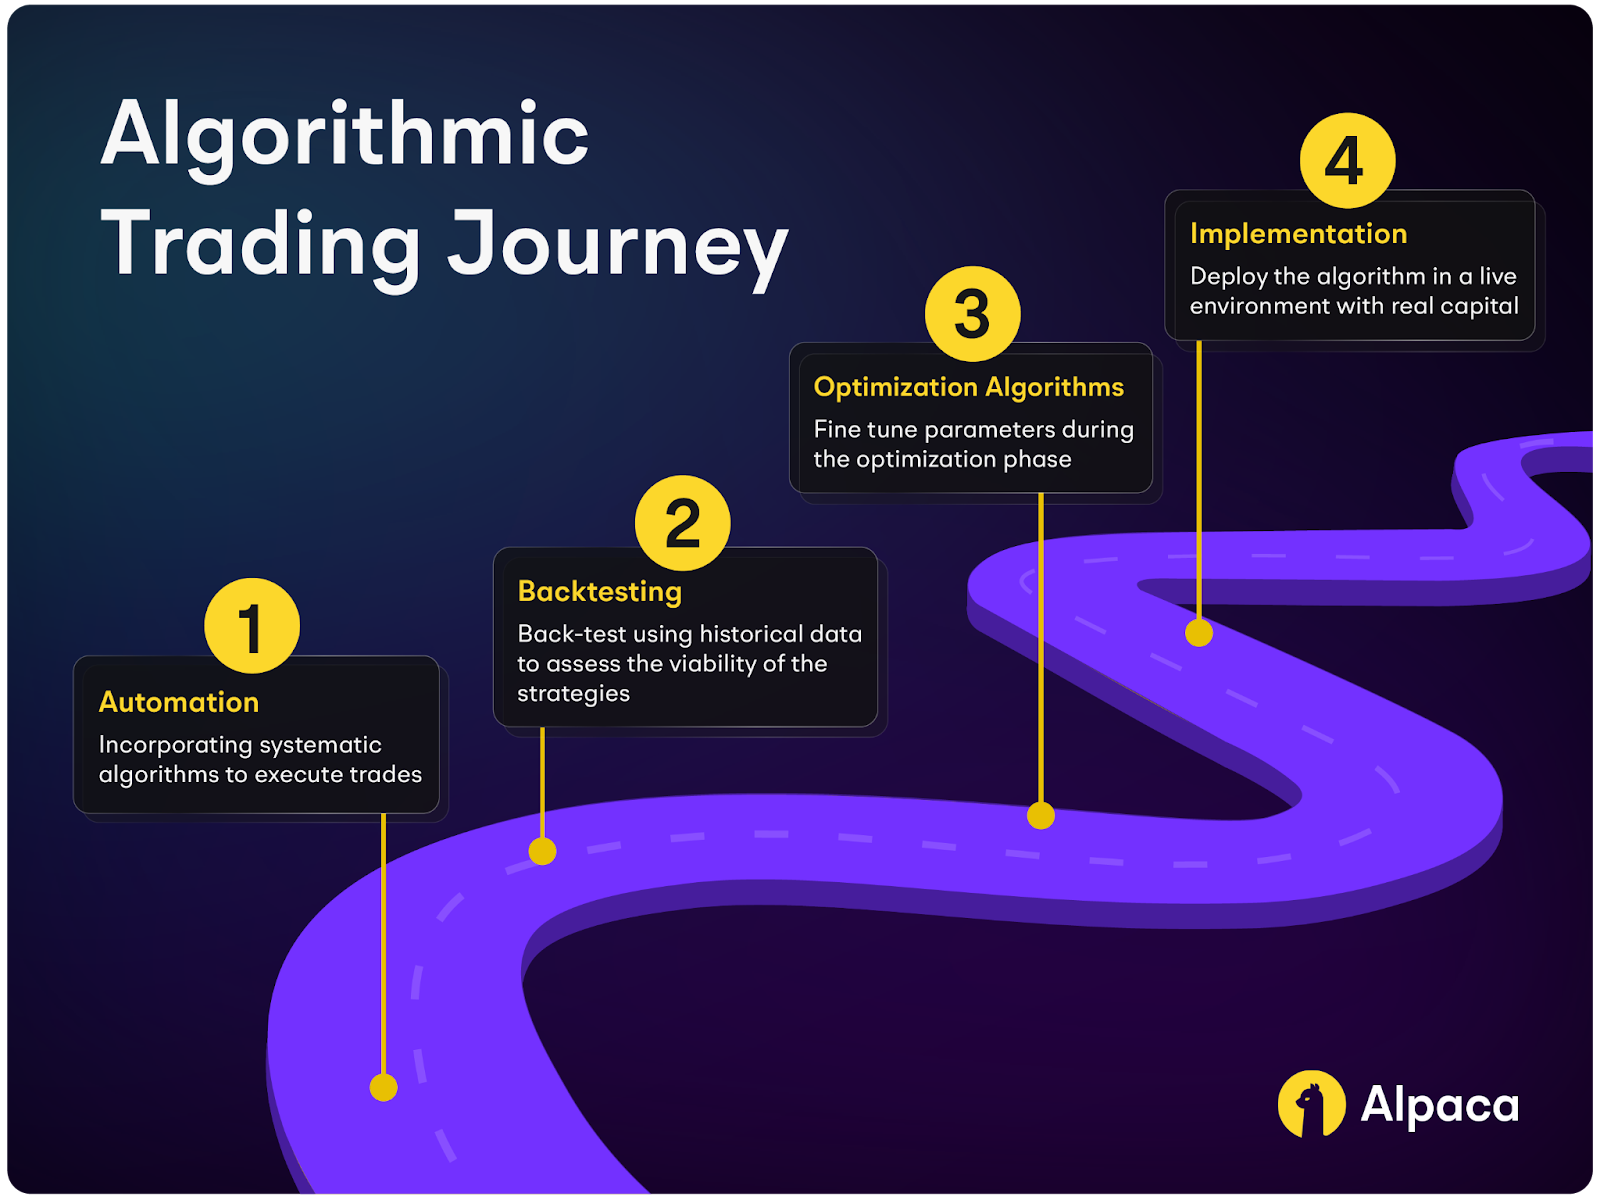 The roadmap to learning algorithmic options trading in four steps